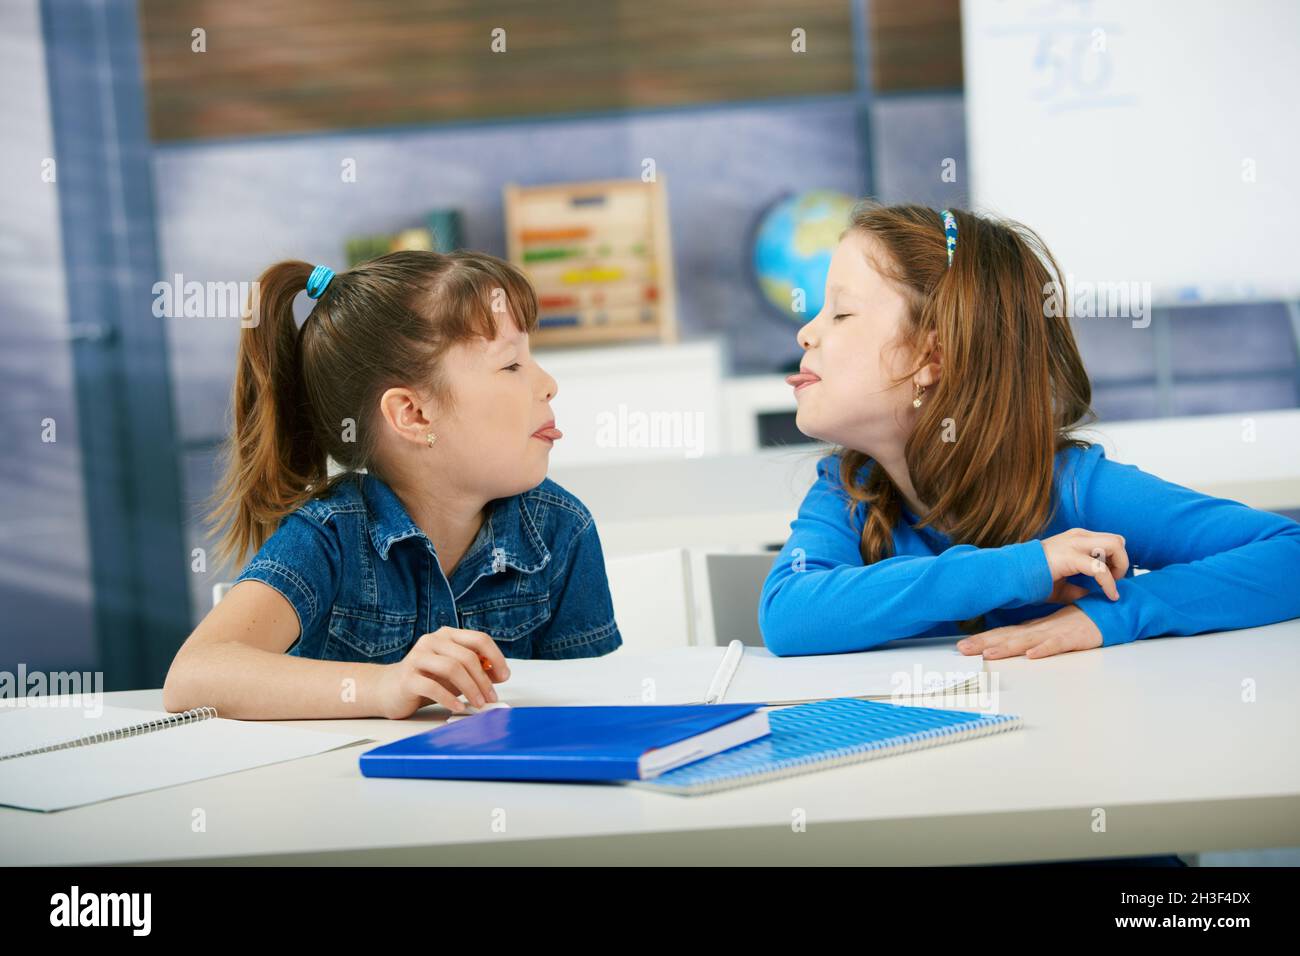 Children sticking tongue in classroom Stock Photo